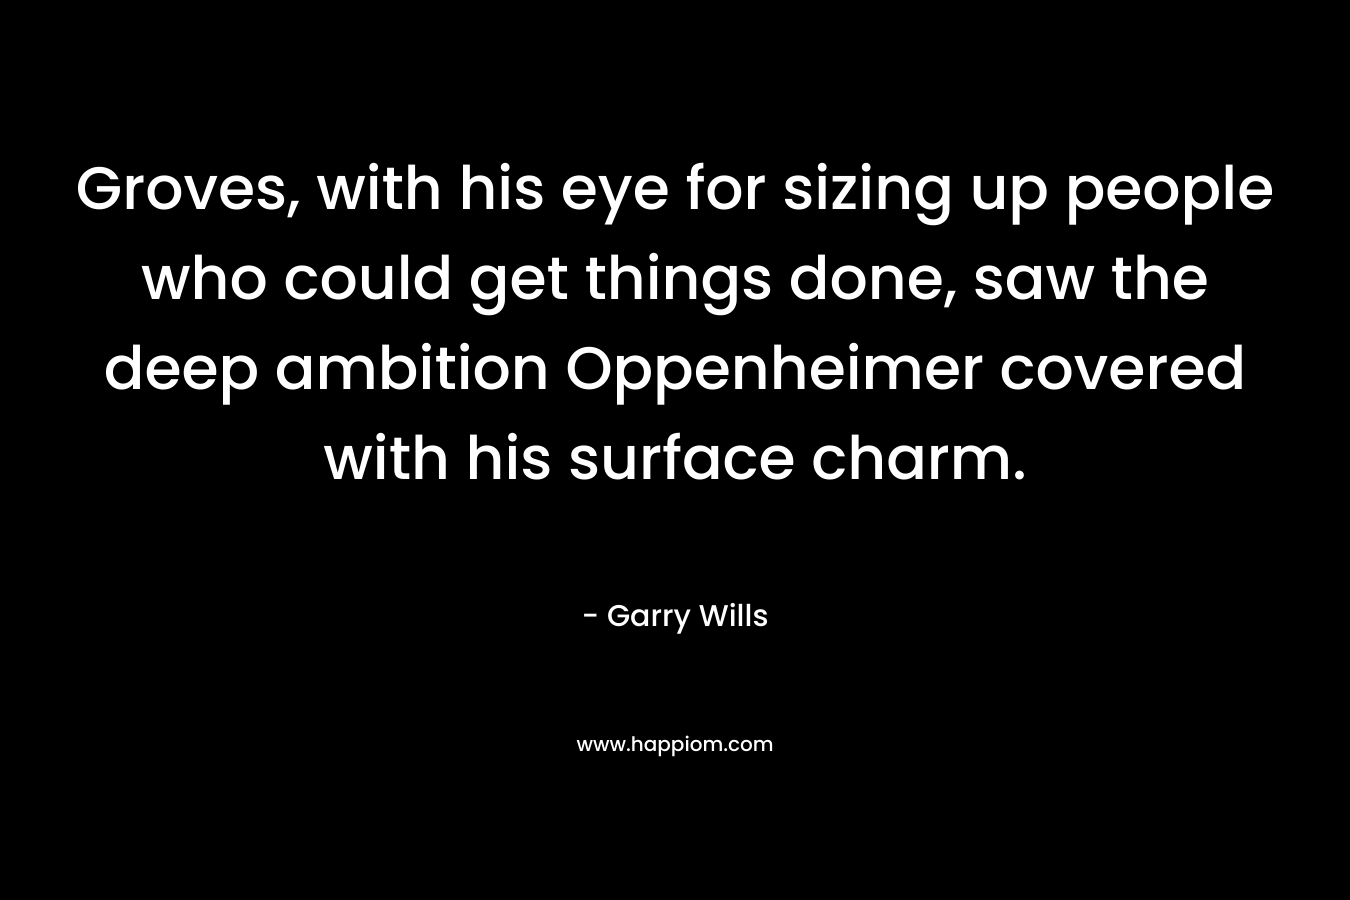 Groves, with his eye for sizing up people who could get things done, saw the deep ambition Oppenheimer covered with his surface charm. – Garry Wills